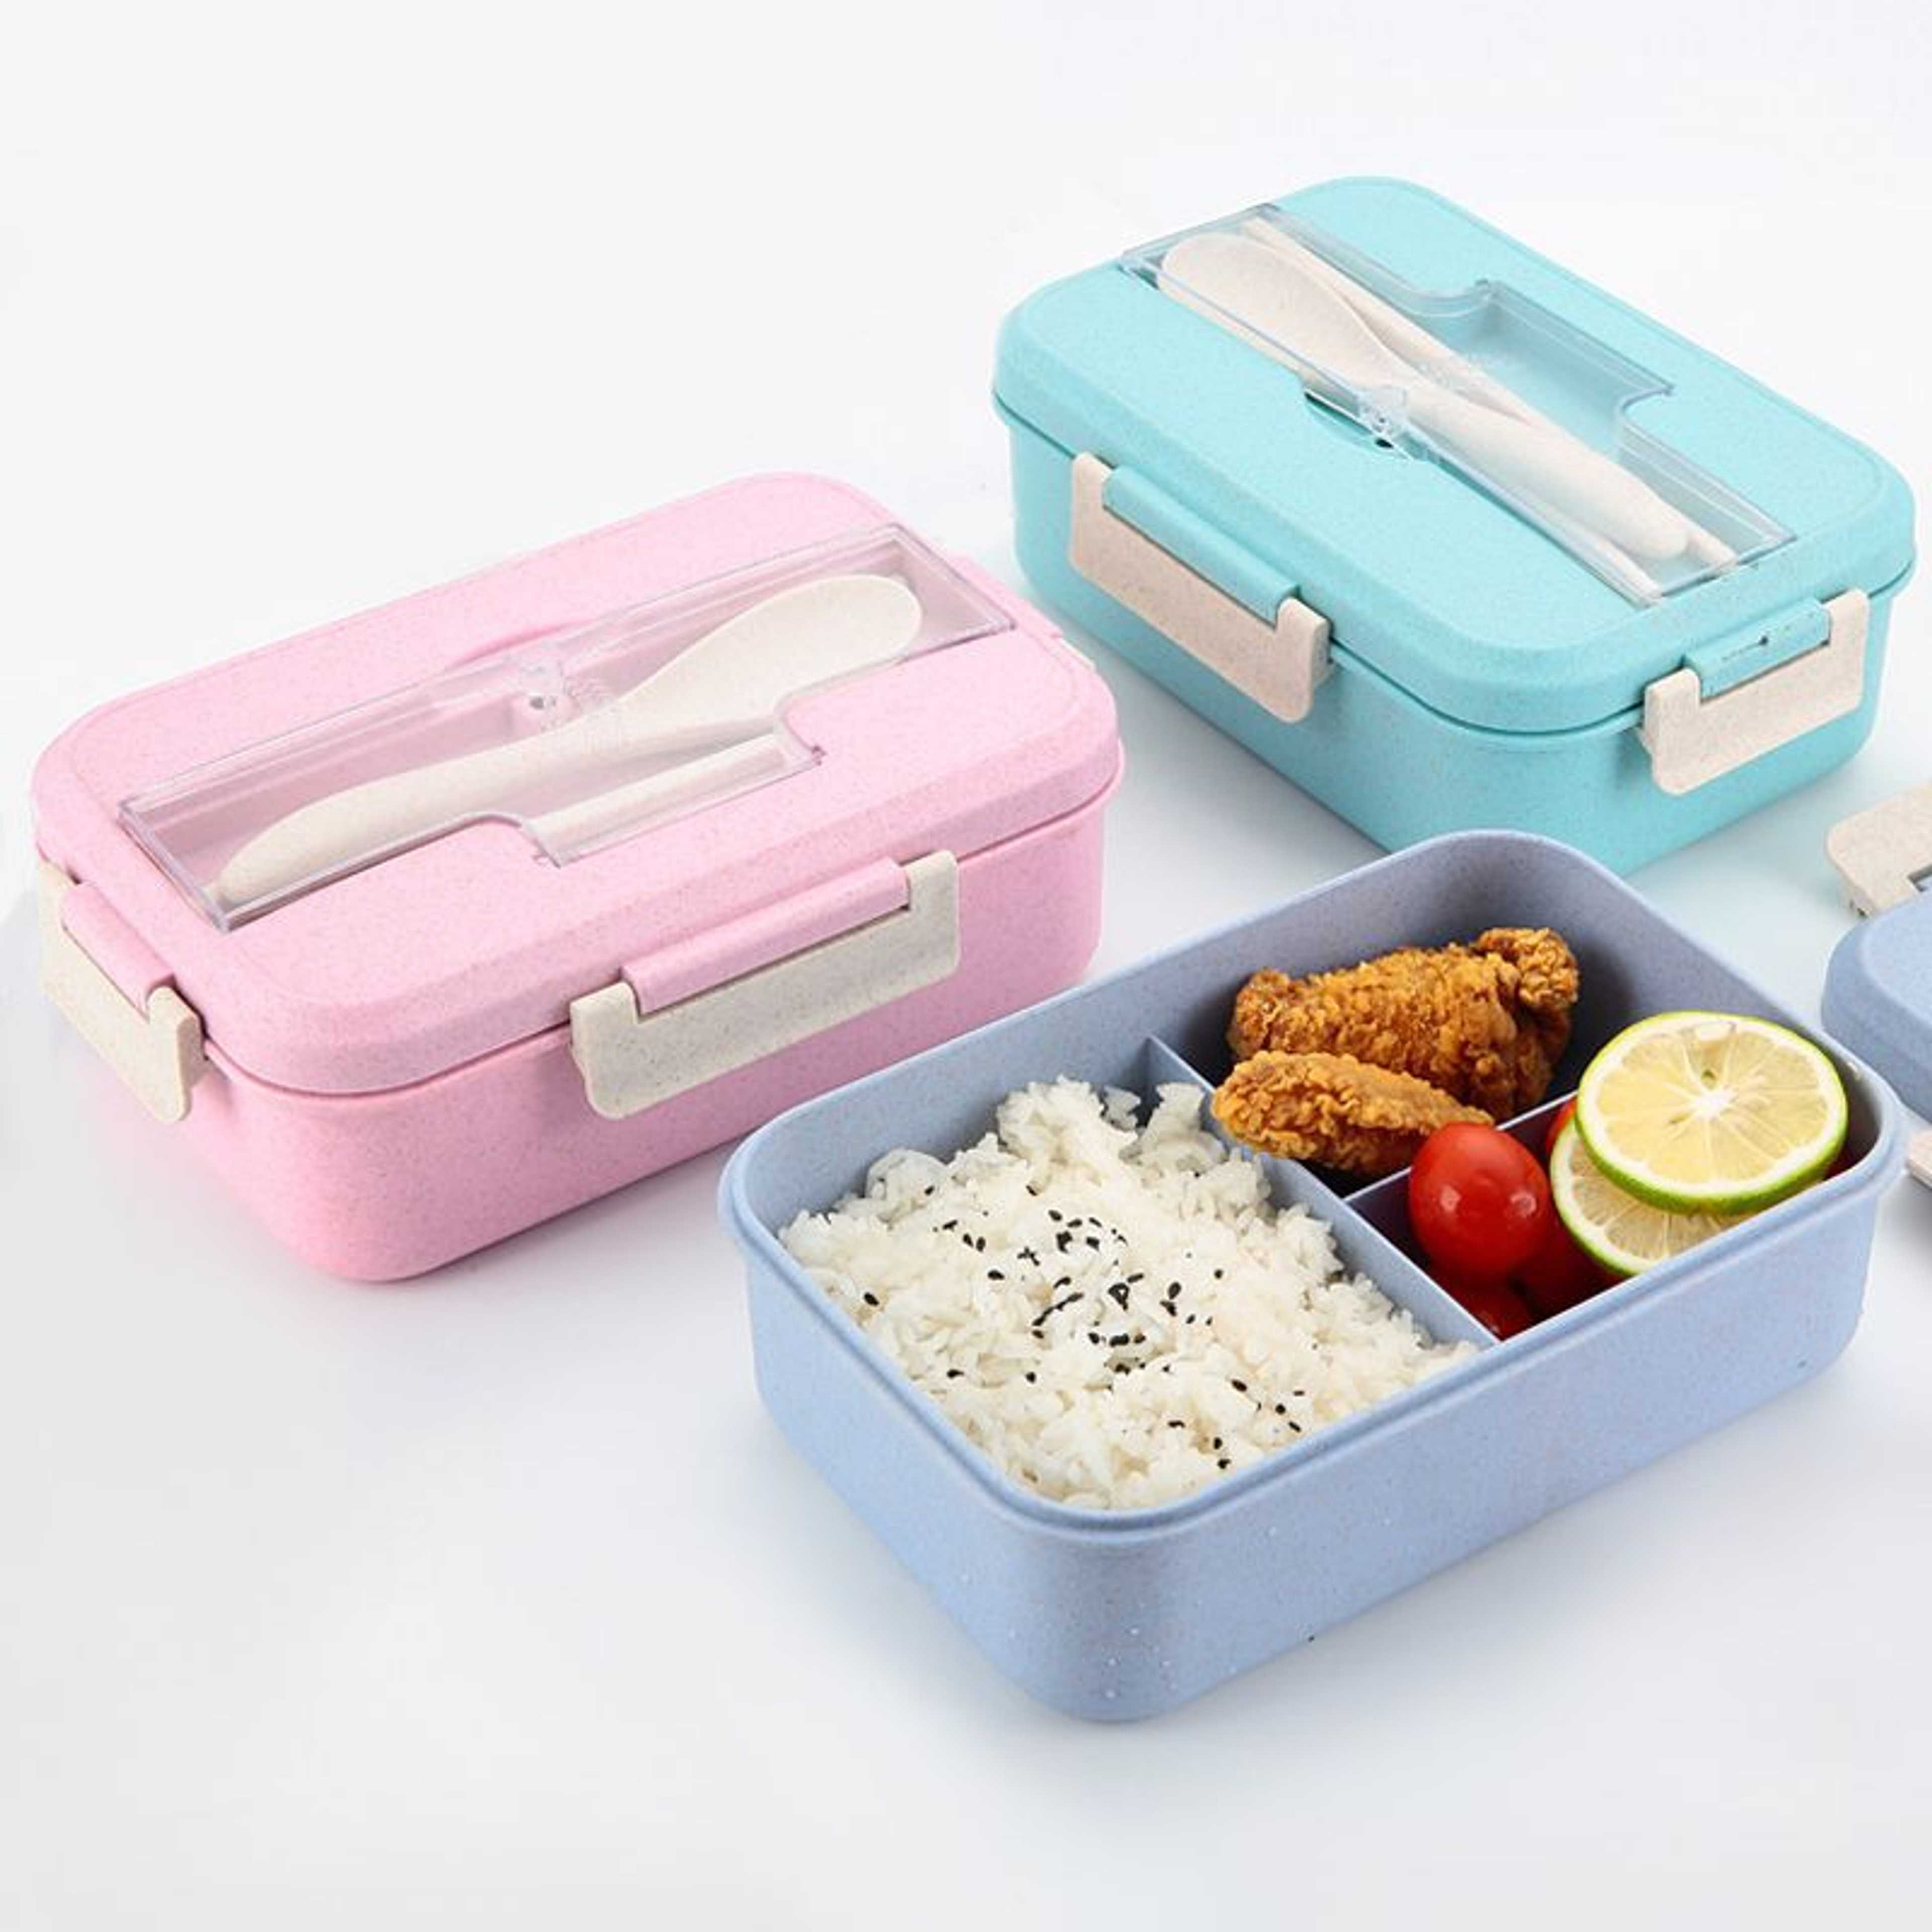 Random Color - Reusable 3-Compartment Lunch Box with Plastic Chopsticks and Spoon, Kids Lunch Box with Lid, Kids Bento Box, 3-Compartment Divided Food Storage Container Tiffin Box